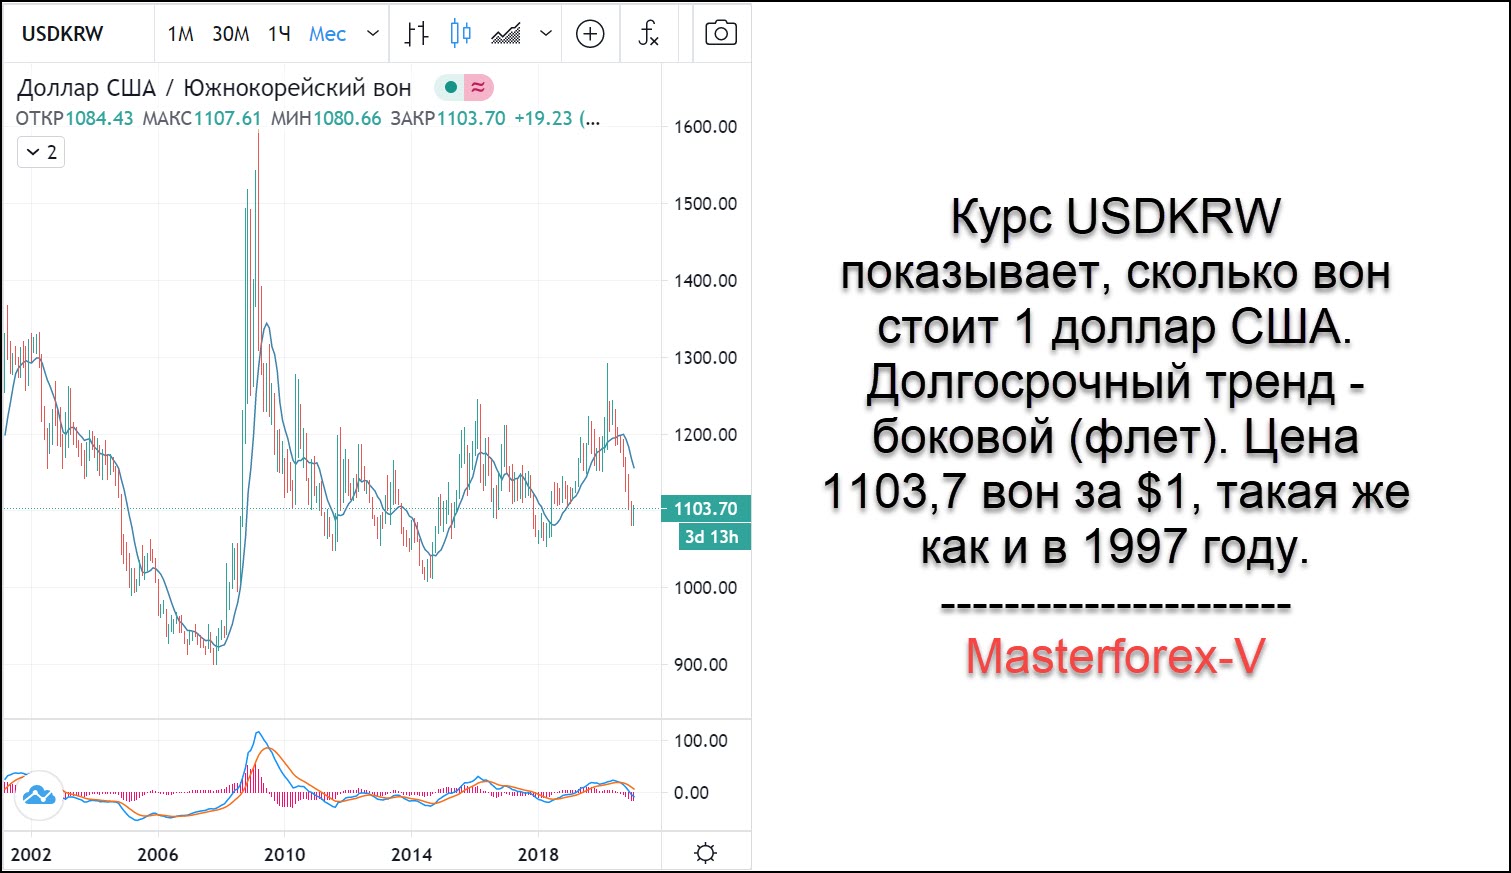 Usdkrw investing forex multiplier what is it